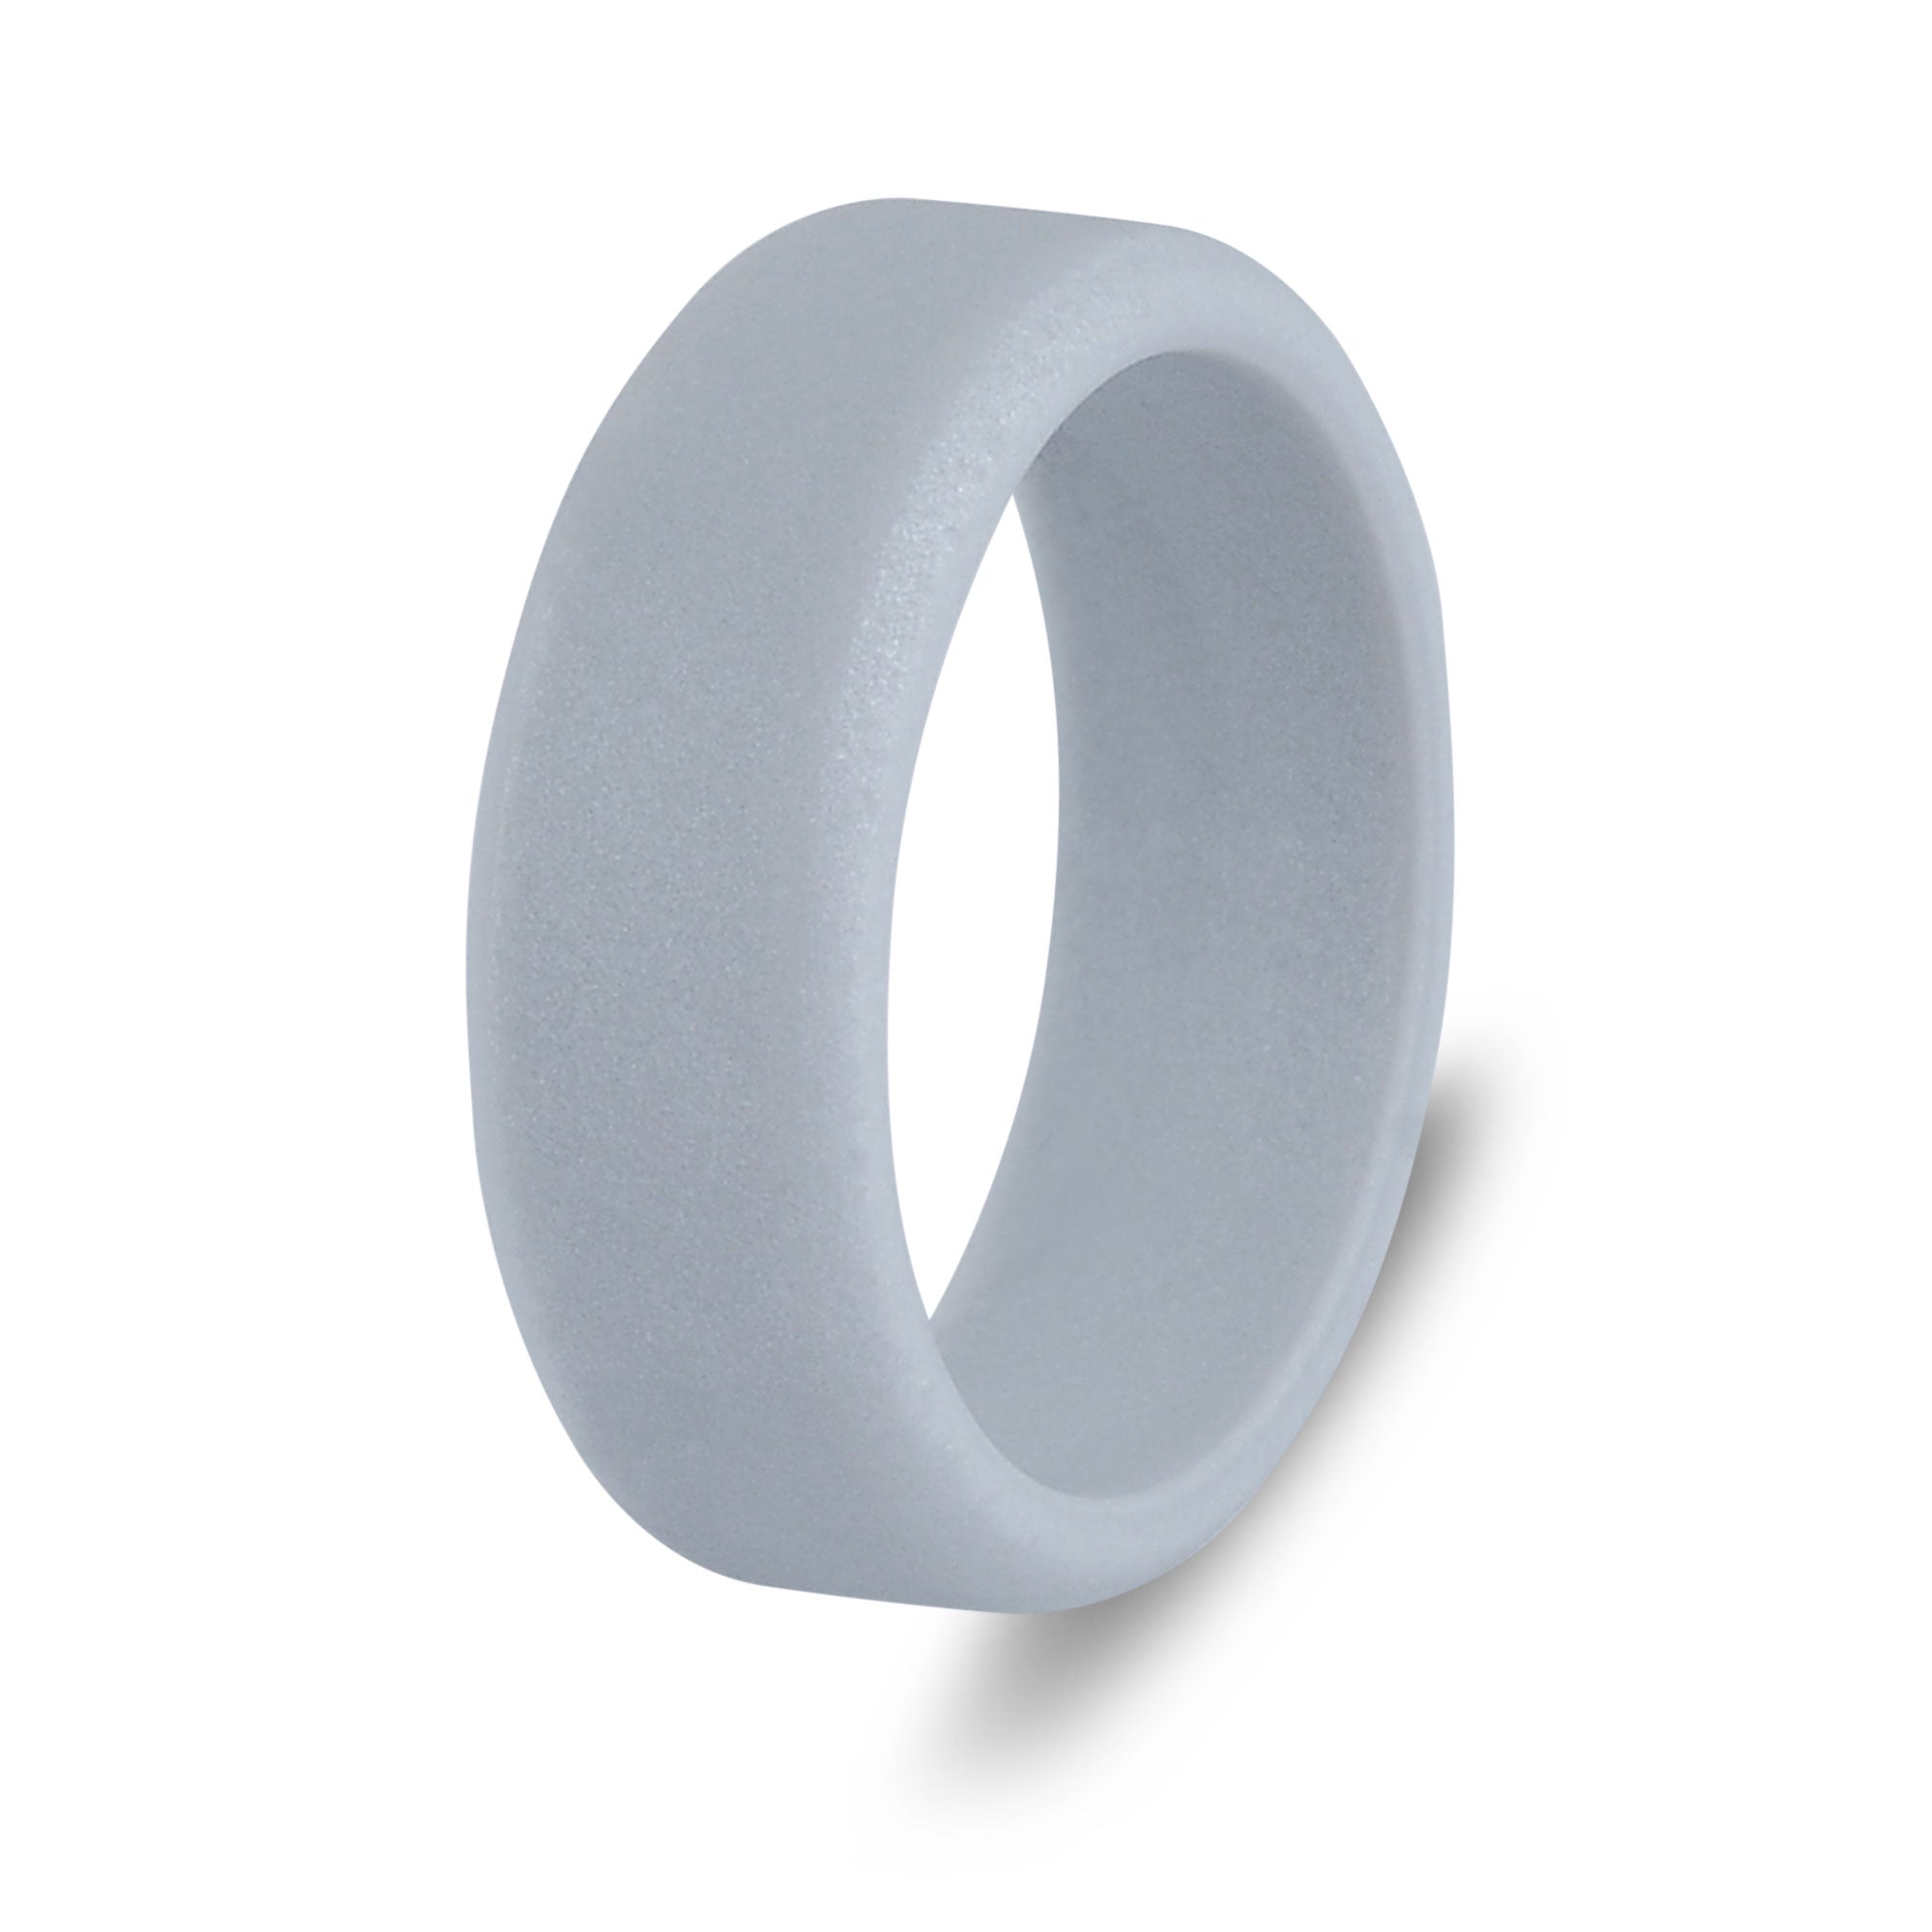 The Slate - Silicone Ring